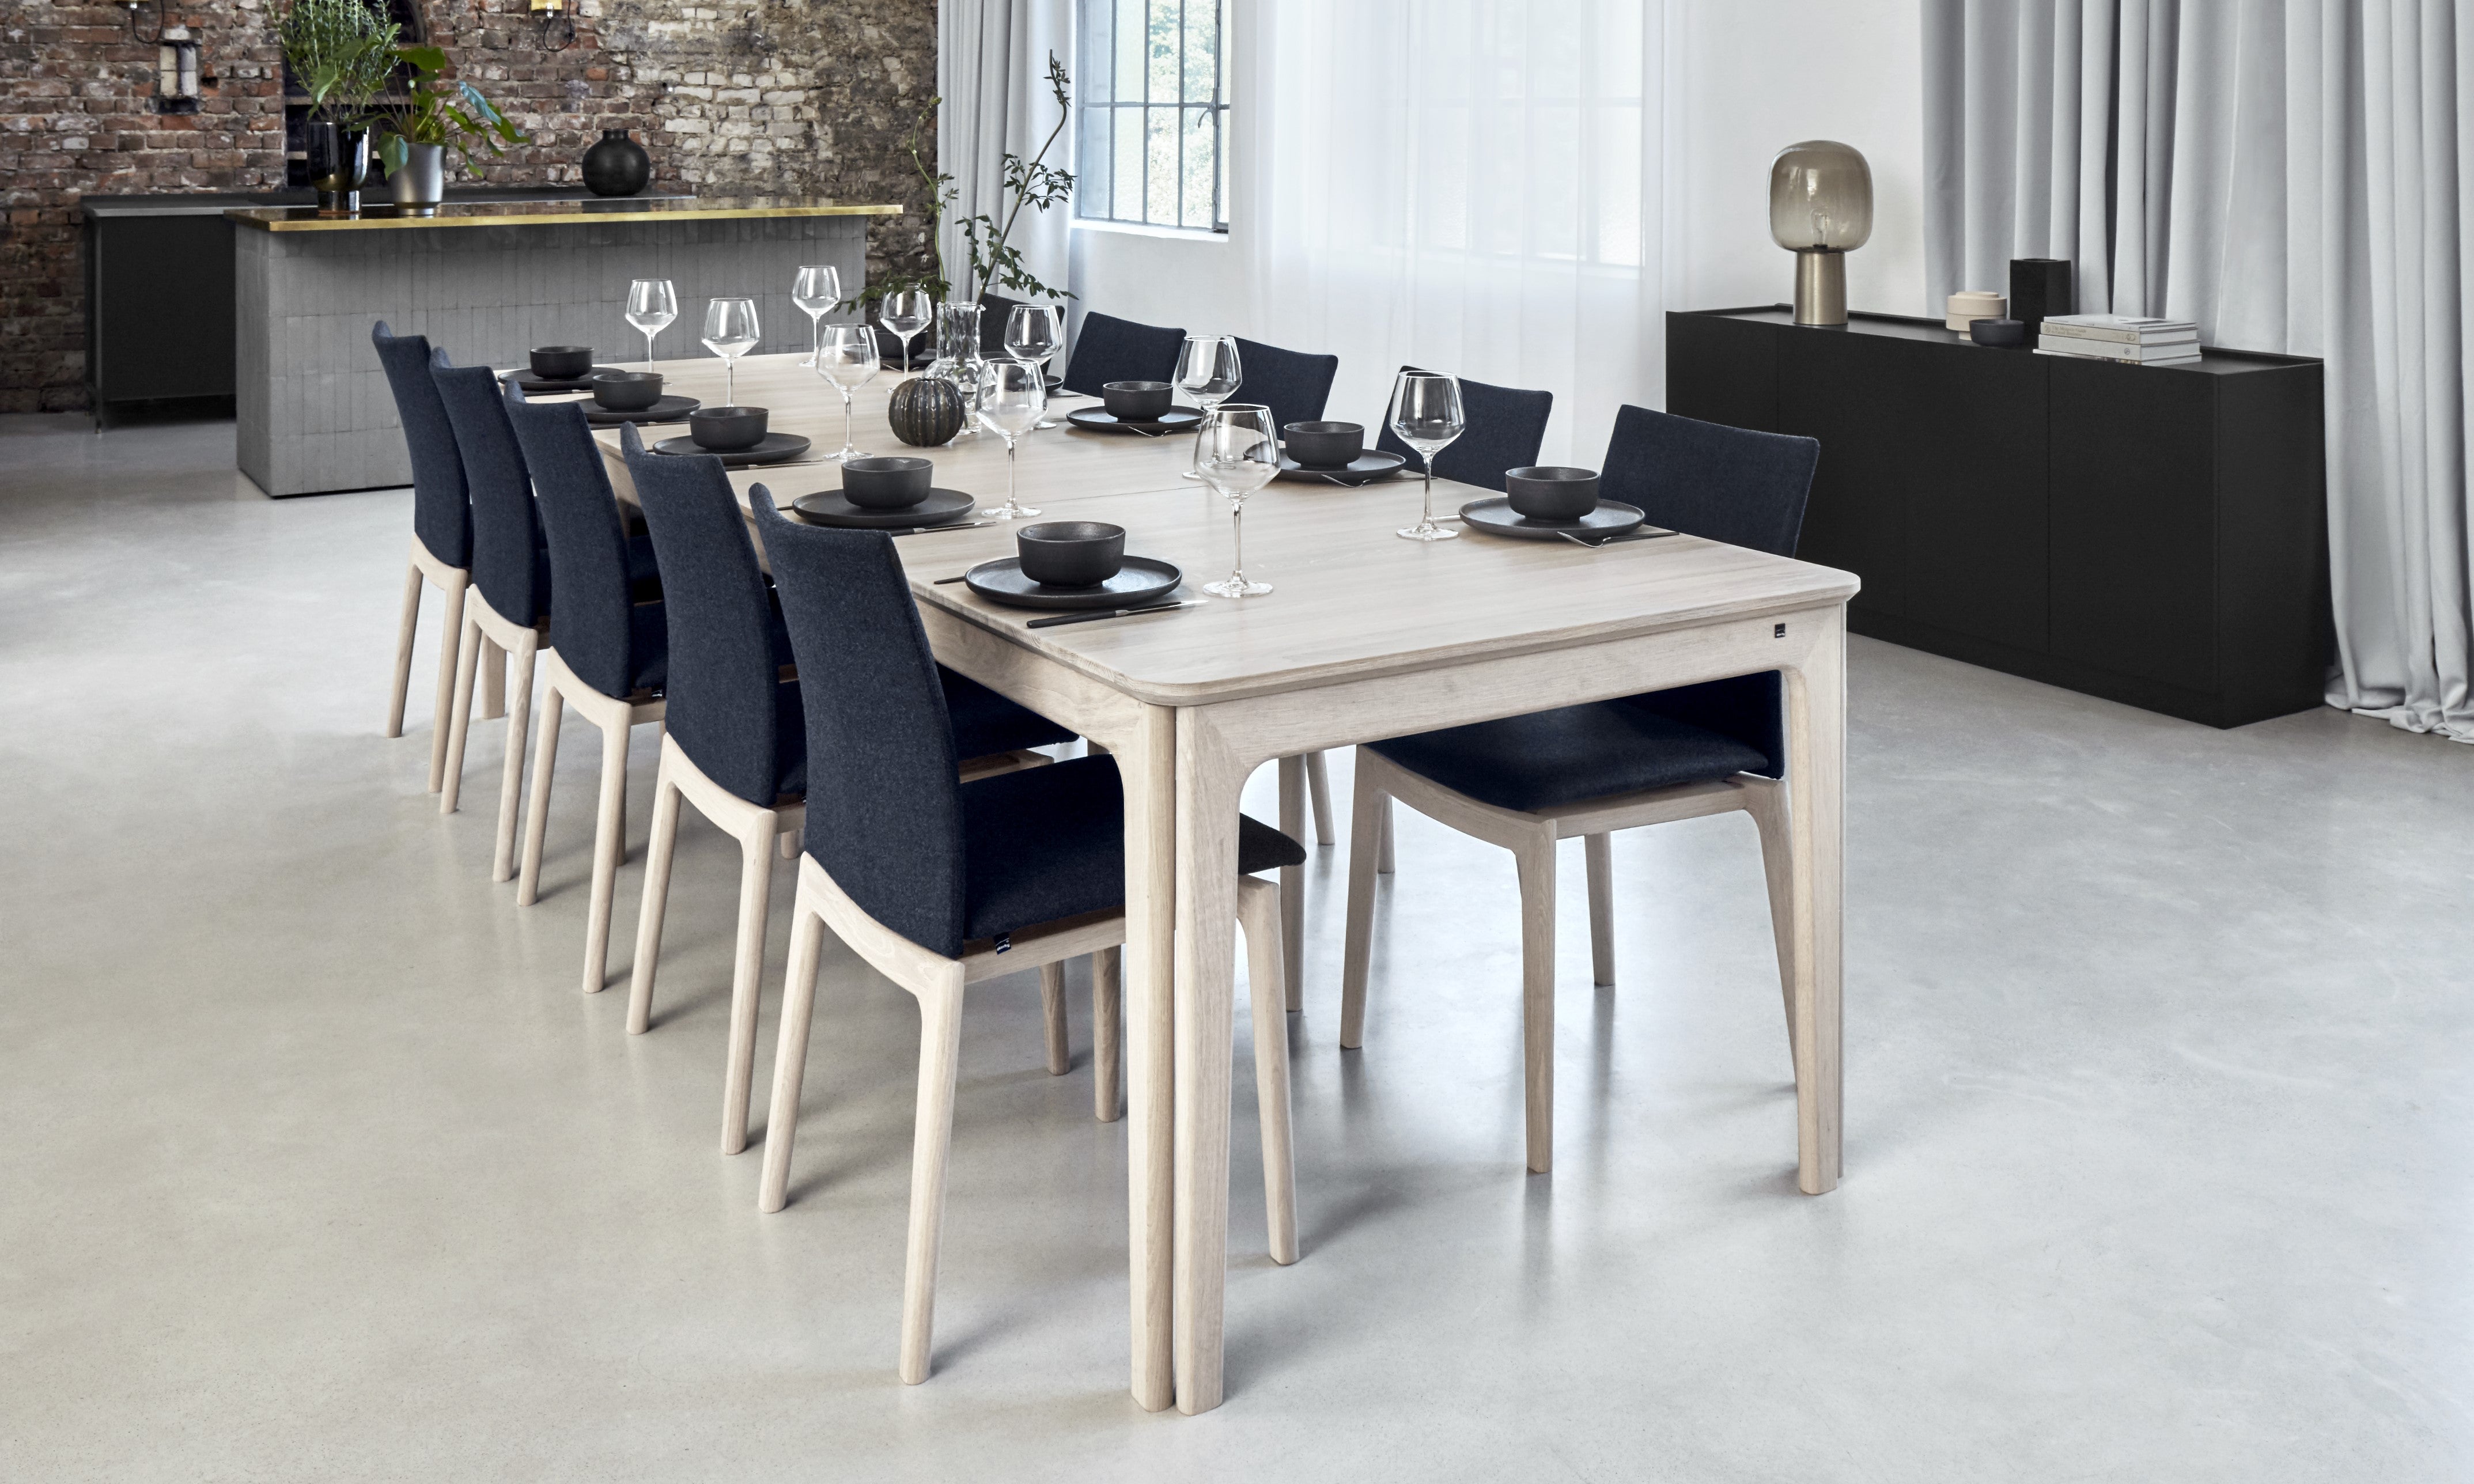 A modern dining room with a Skovby SM26 expanding table and chairs.